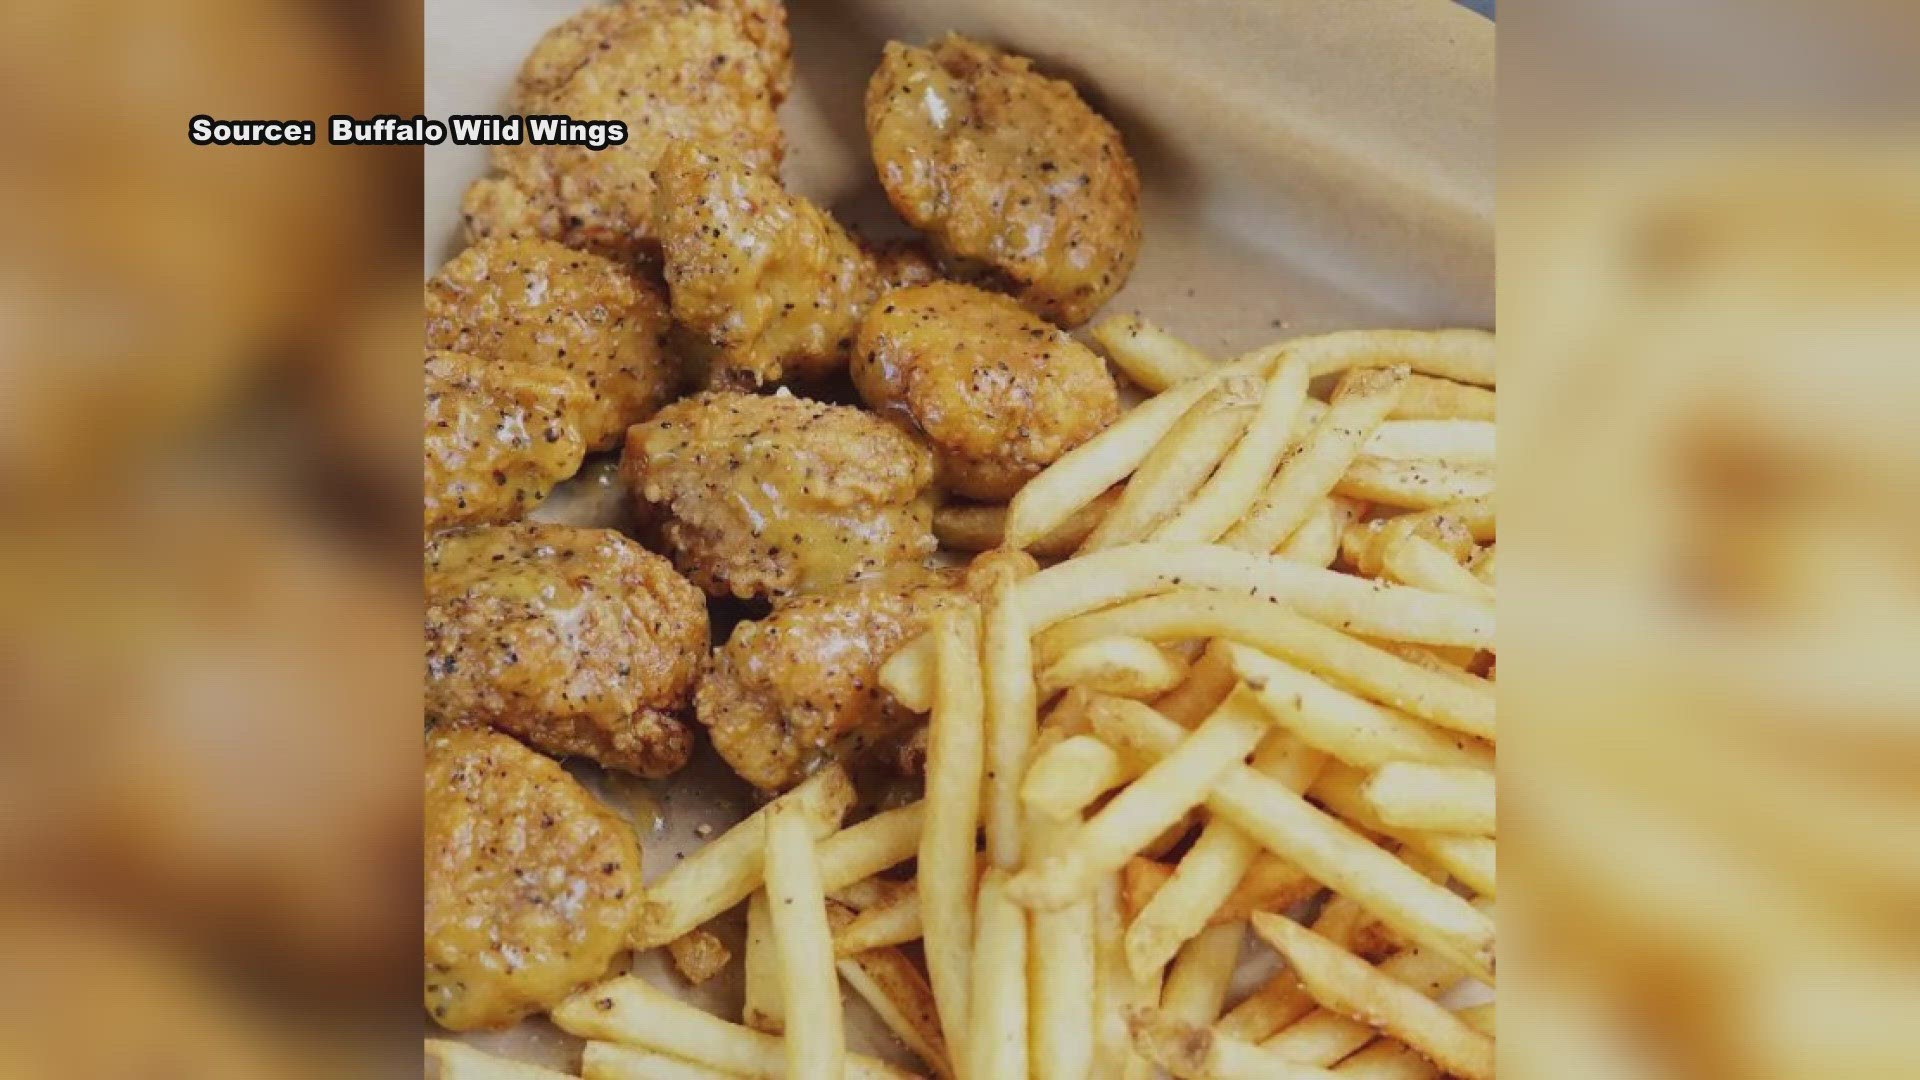 Customer claims that Buffalo Wild Wings boneless wings are actually just chicken nuggets.